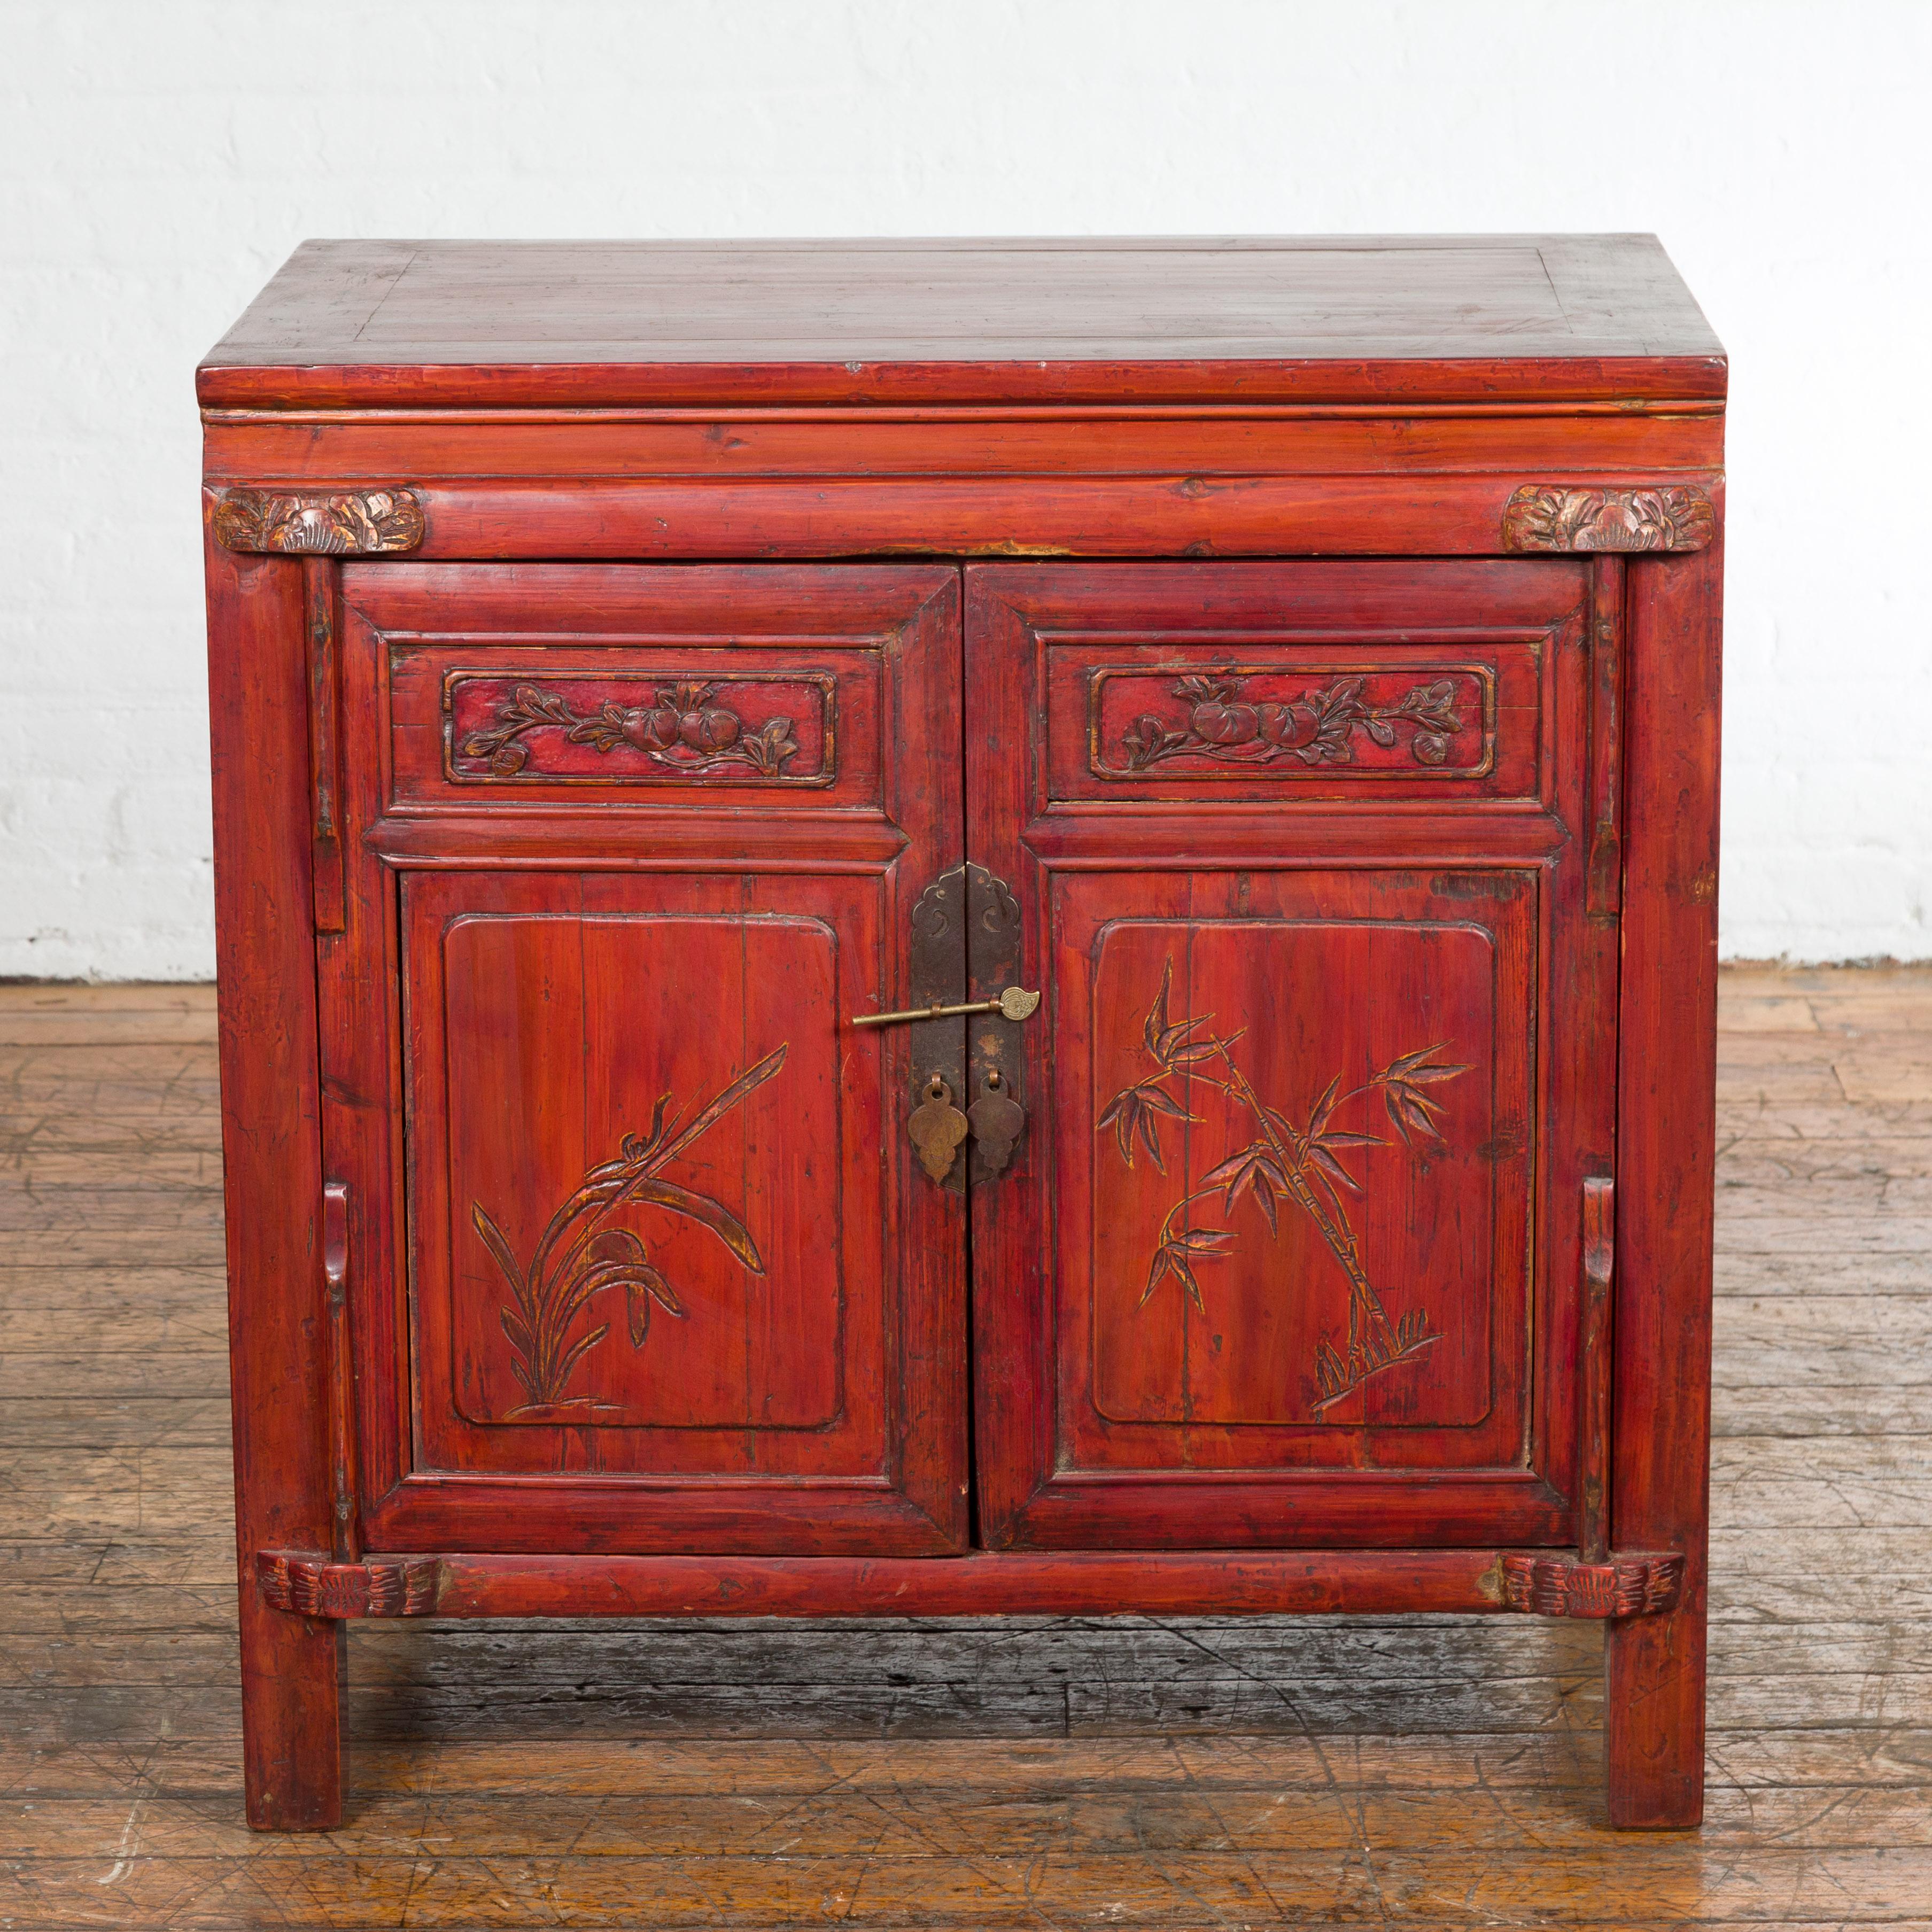 Chinese Red Lacquer Late Qing Dynasty Bedside Cabinet with Carved Décor In Good Condition For Sale In Yonkers, NY